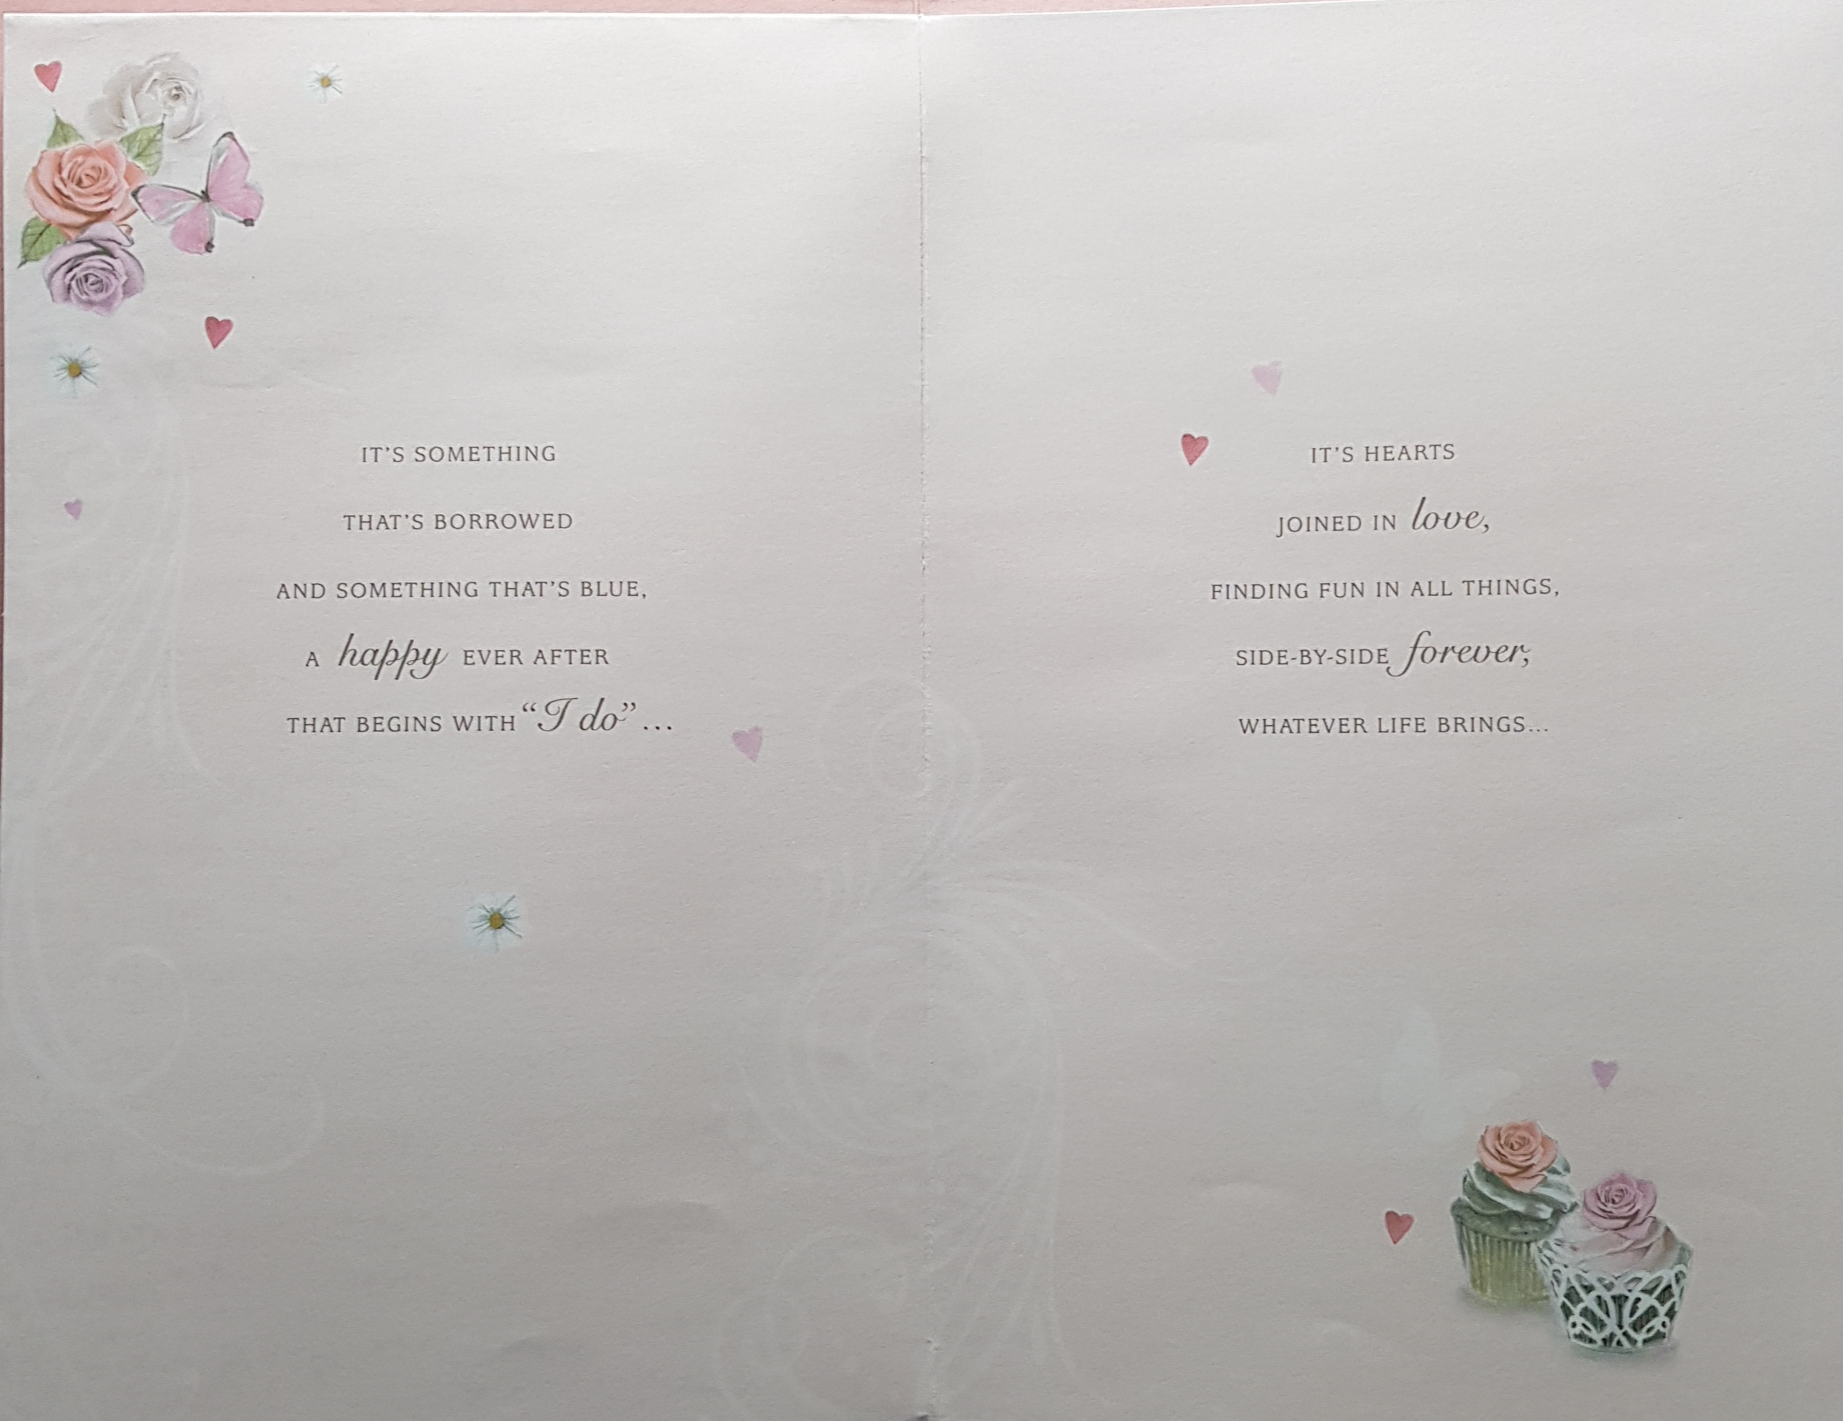 Wedding Card - Wedding Cake With Pink Roses & Champagne